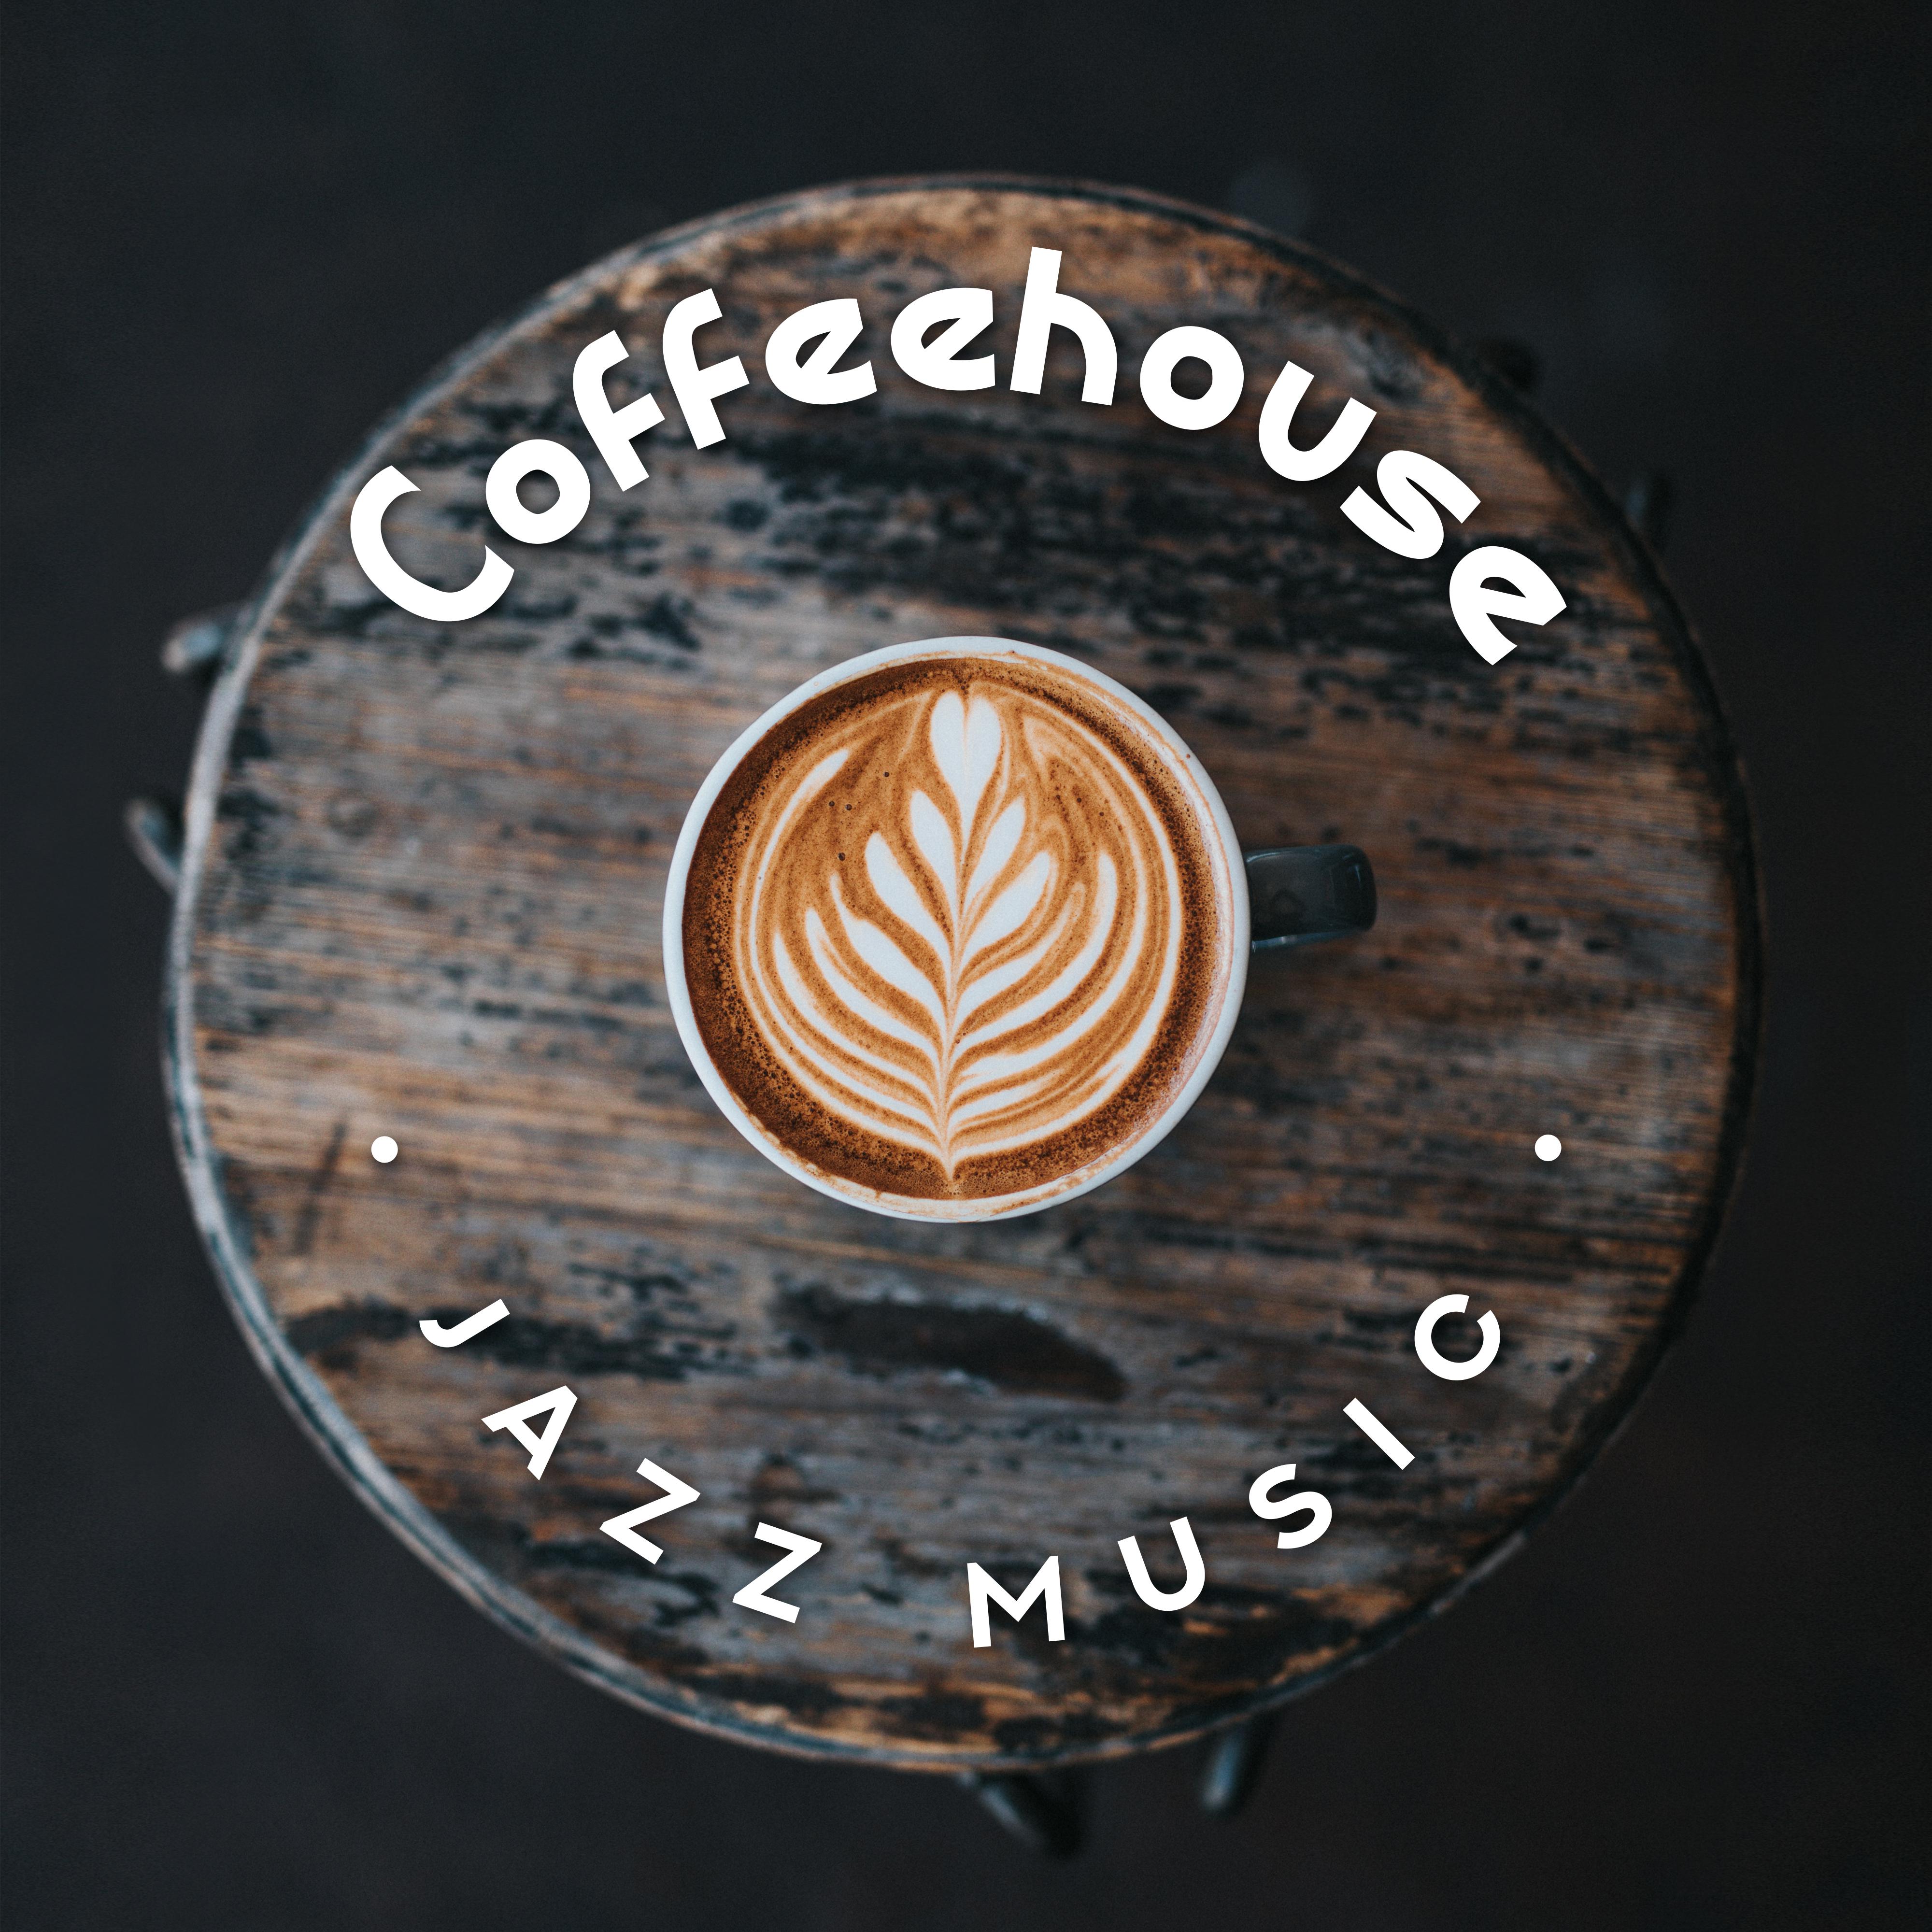 Coffeehouse Jazz Music: 15 Best Instrumental Tracks for Real Coffee Gourmets and Lovers of Good Jazz Music